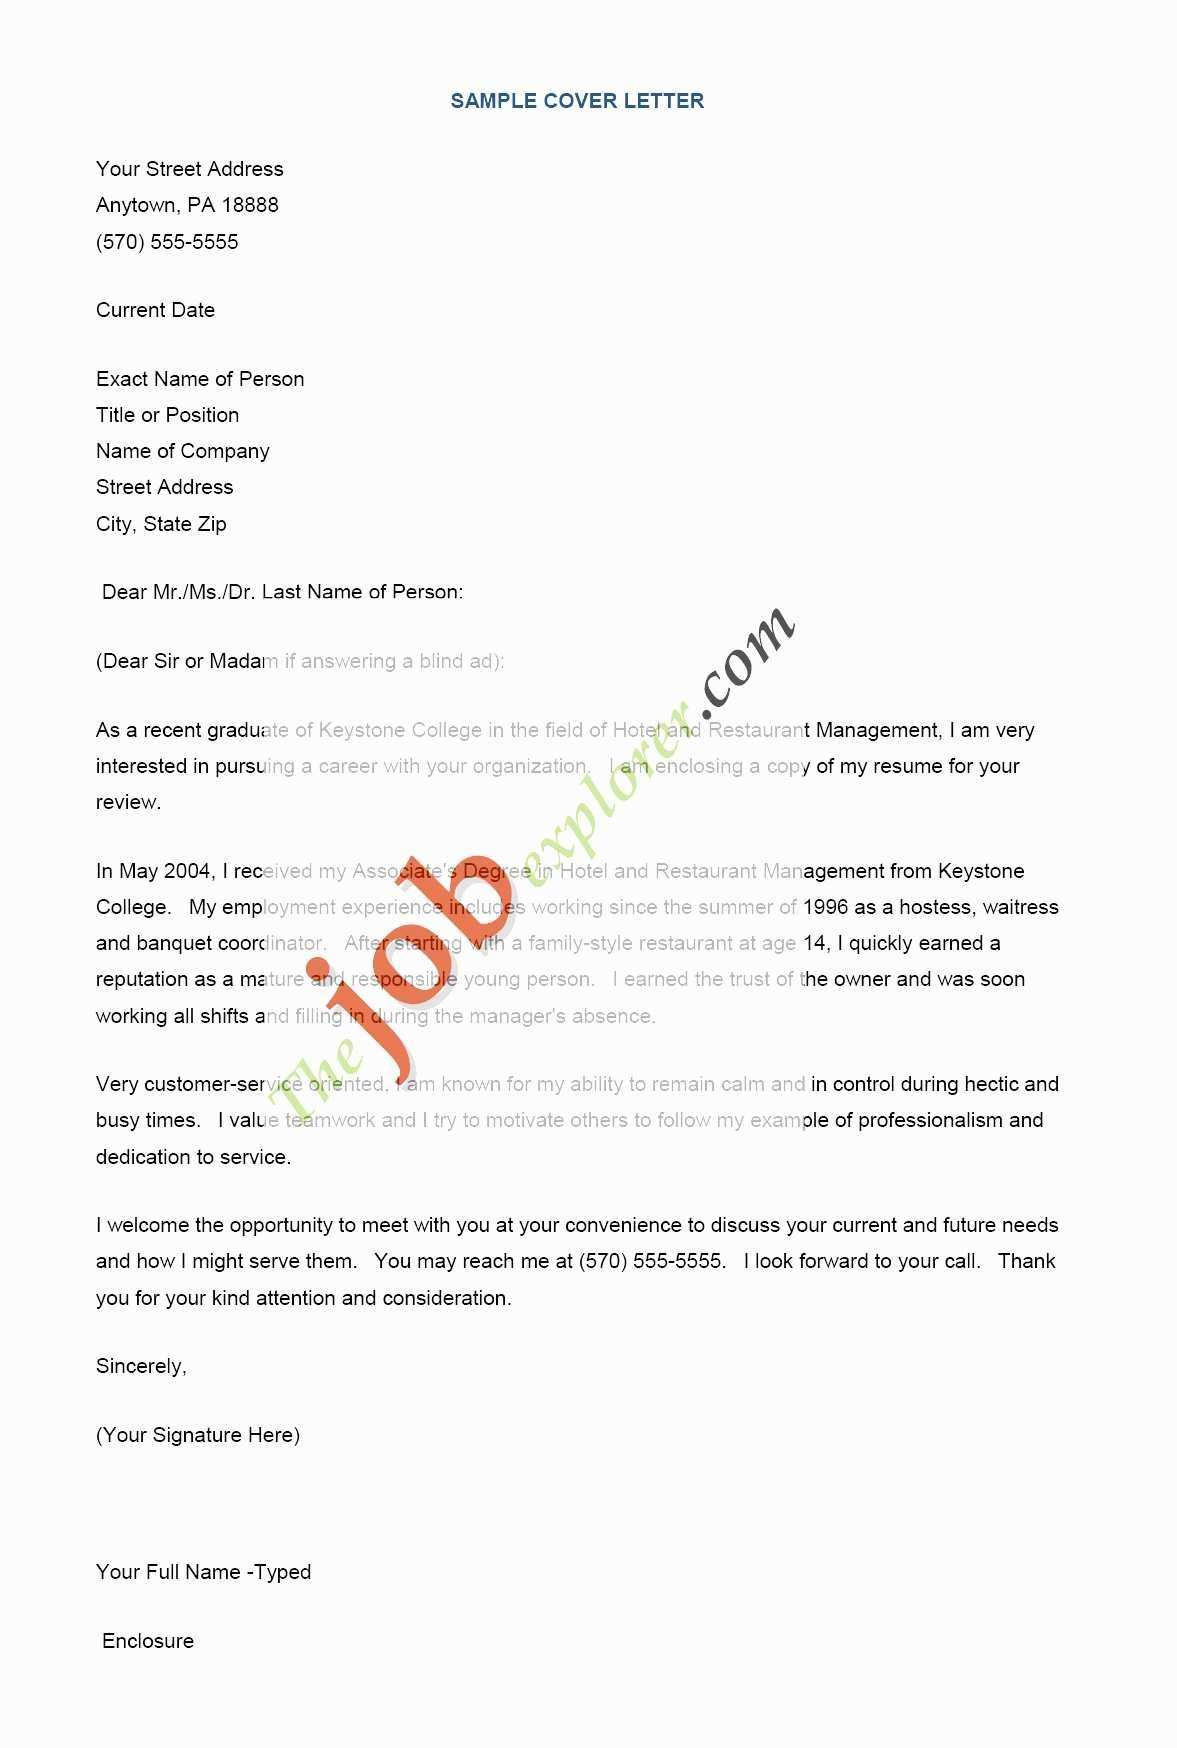 Free Template for A Cover Letter for A Resume - Awesome Free Cover Letter Templates